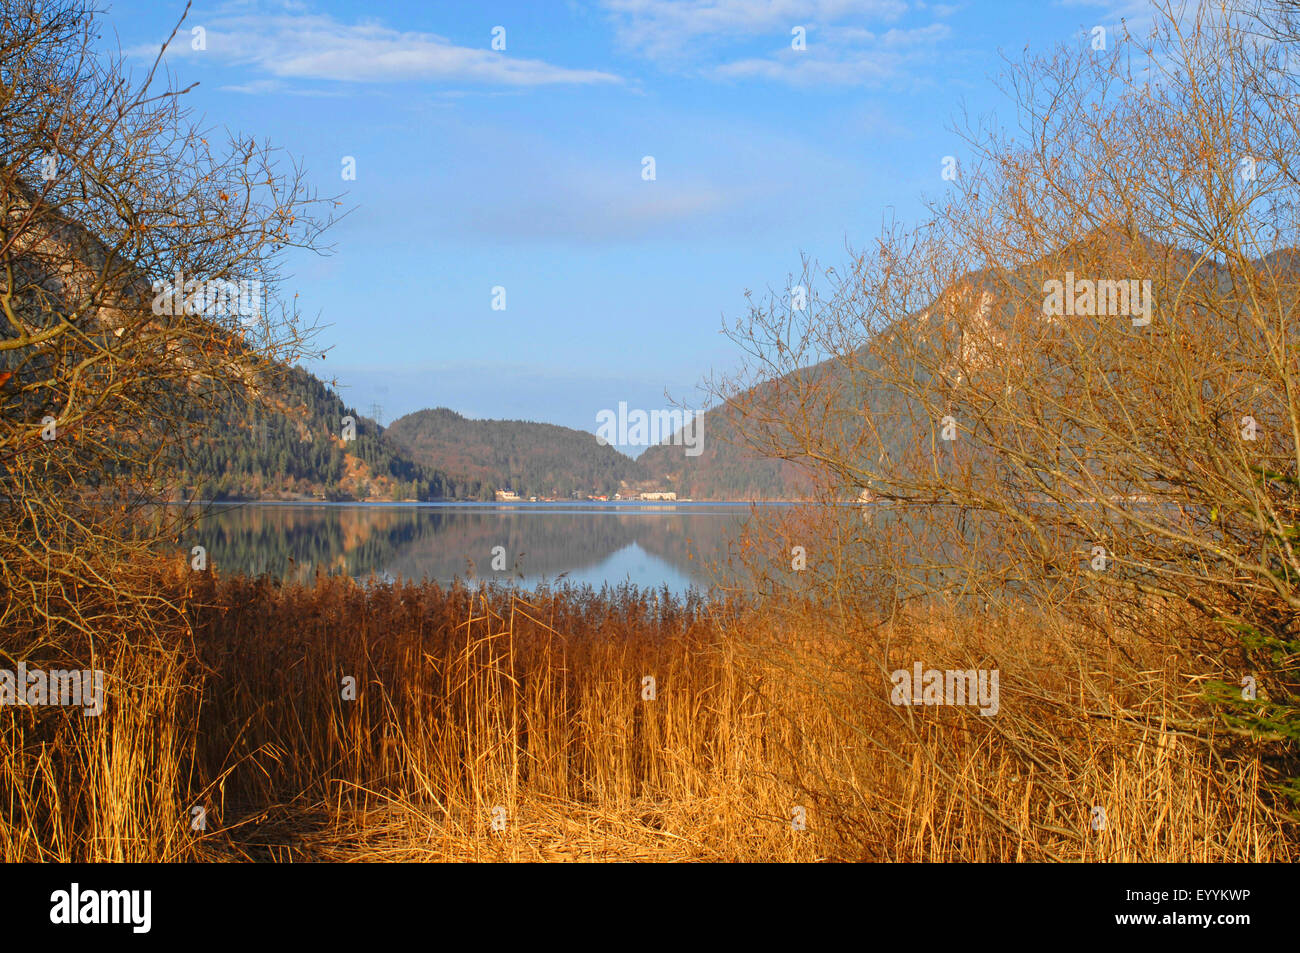 reed zone at the Zwergen peninsula at Lake Walchensee in evening light, Germany, Bavaria, Walchensee Stock Photo